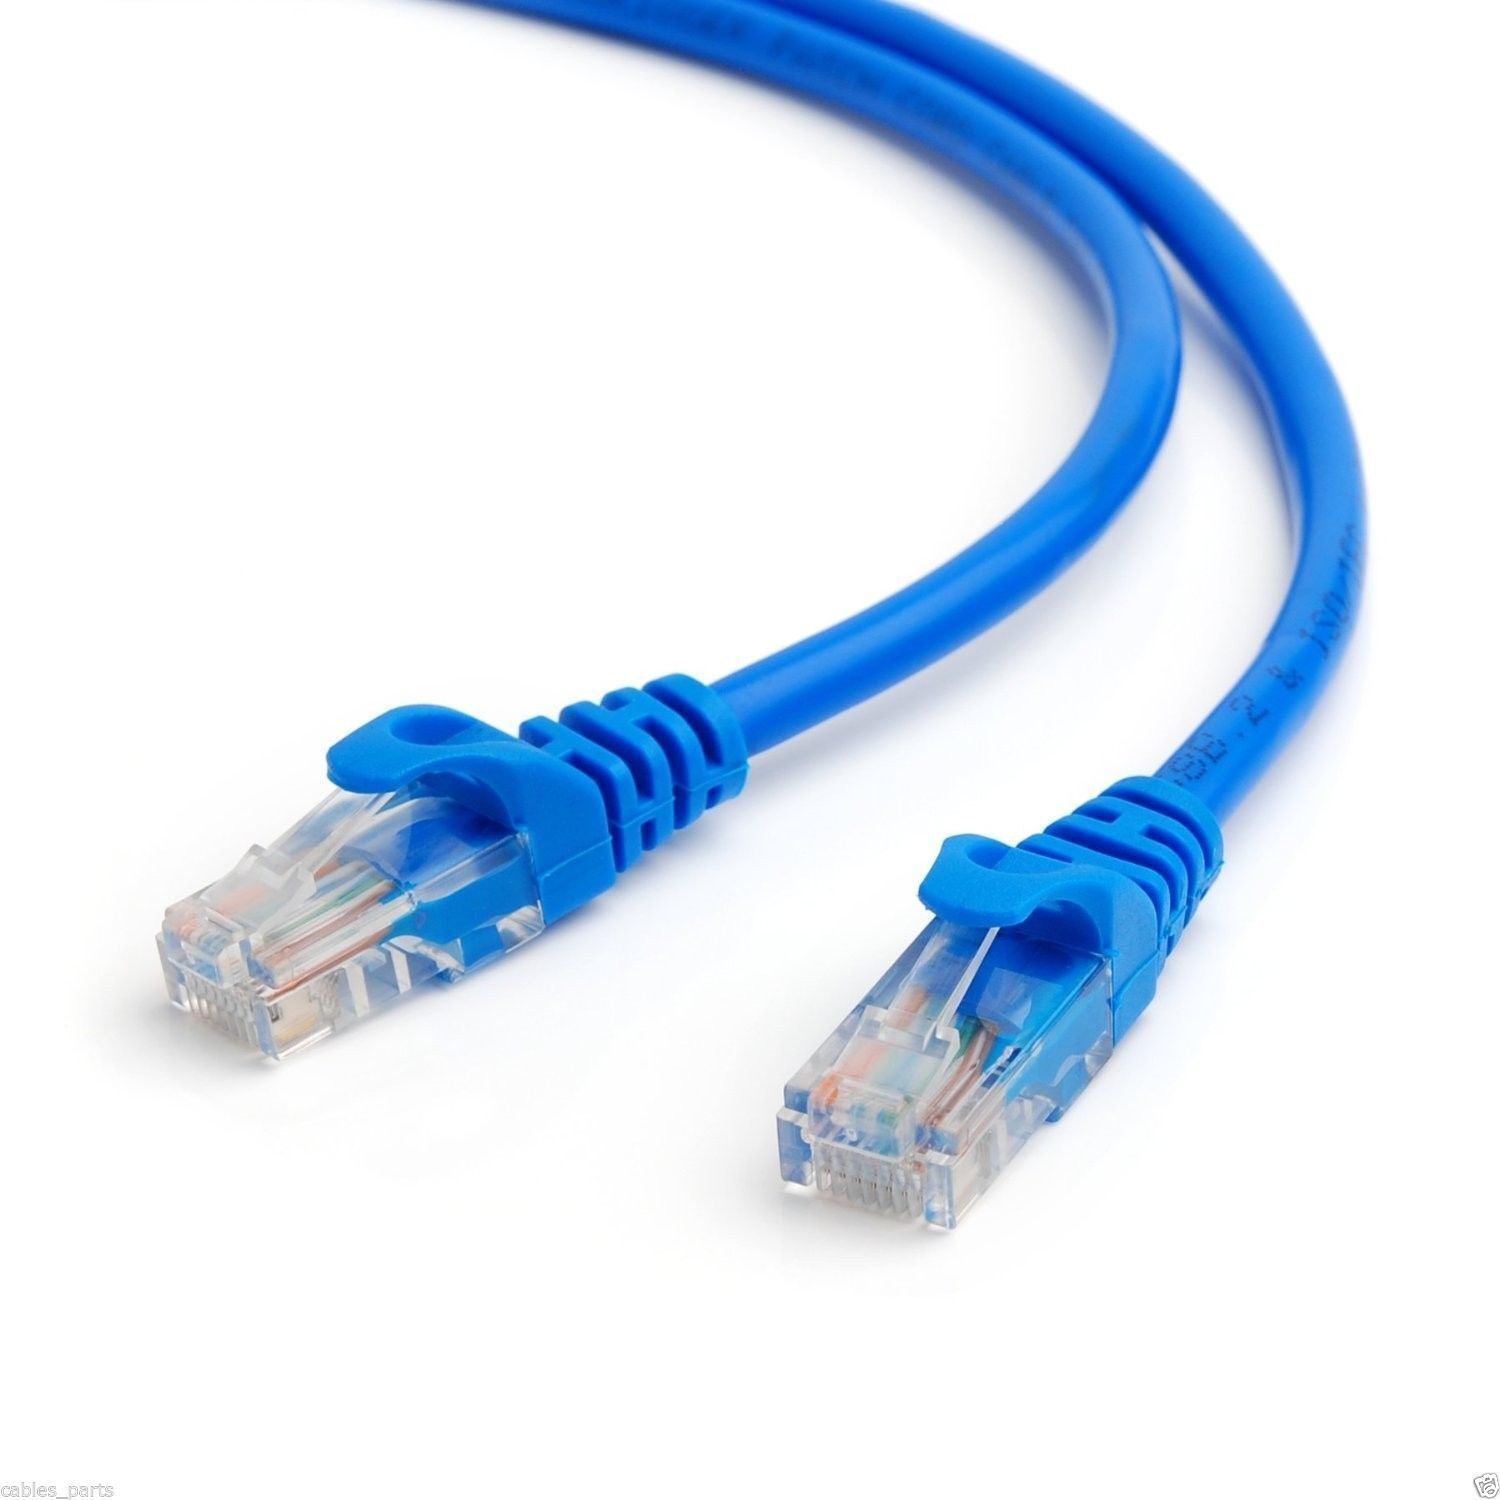 50ft Cat5 Patch Cord Cable 500mhz Ethernet Internet Network LAN RJ45 UTP Blue US Generic Does Not Apply - фотография #3